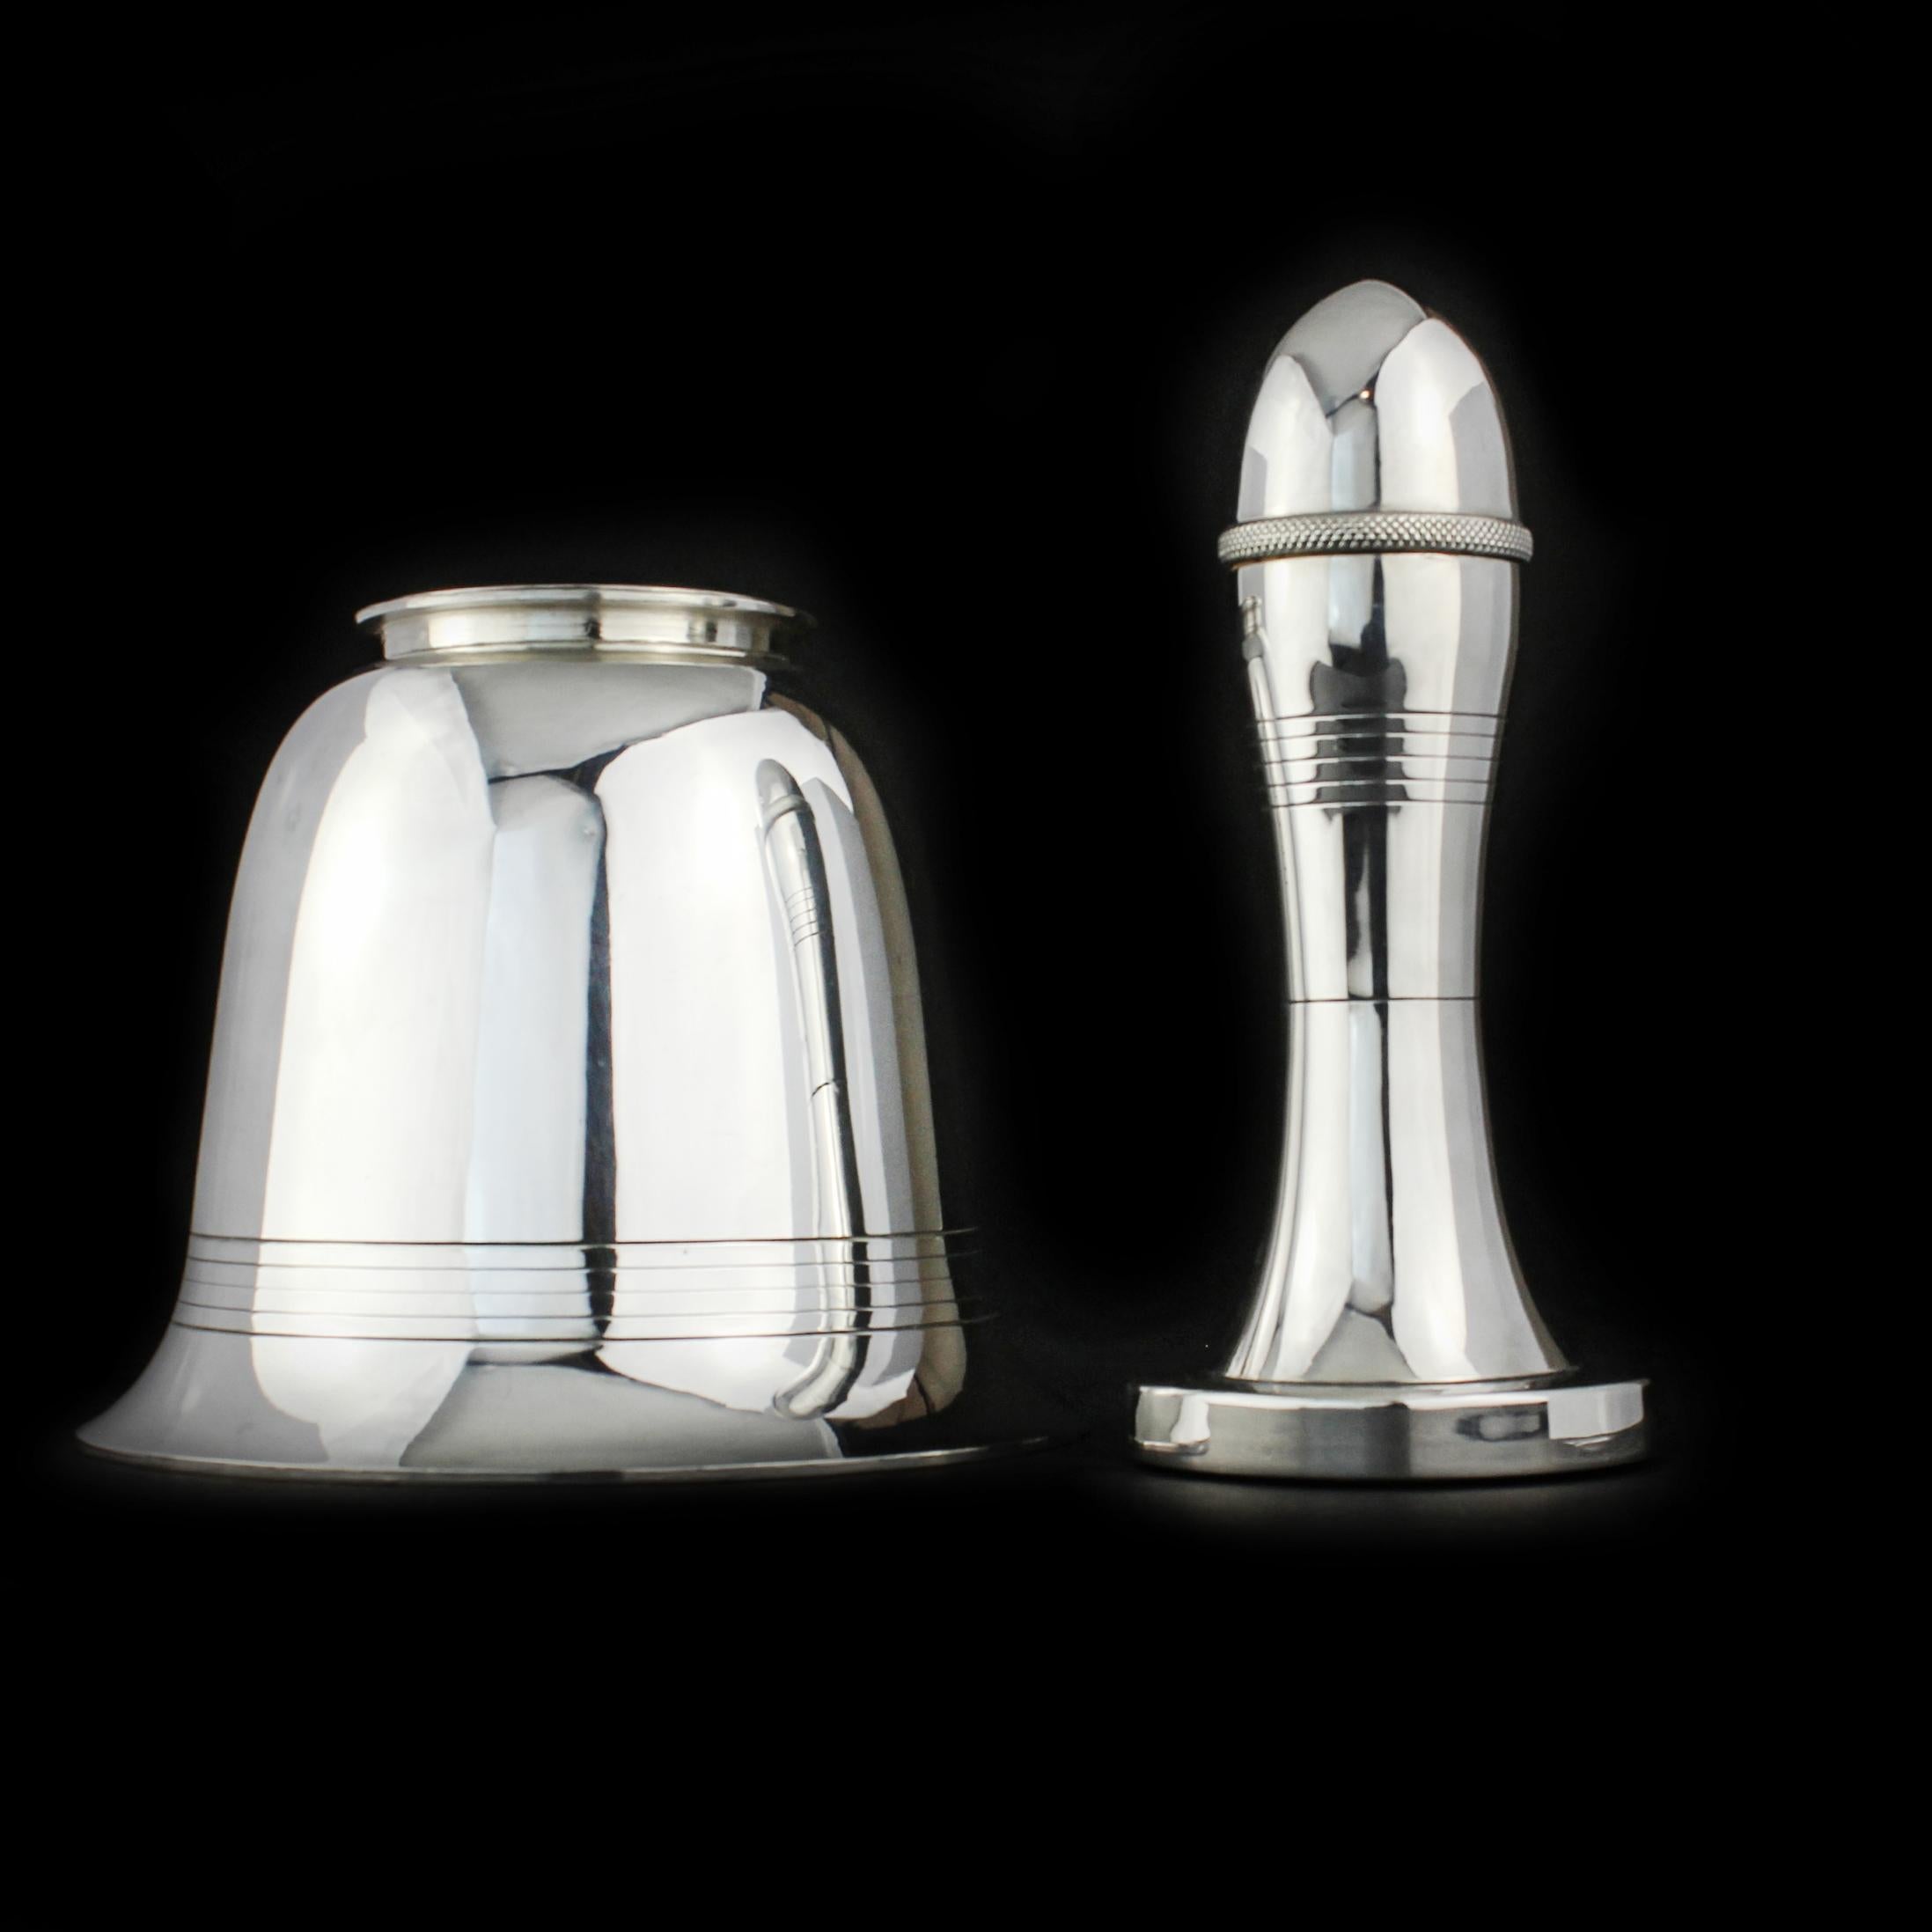 English Vintage Asprey & Co. Silver-Plated 'Bell' Cocktail Shaker